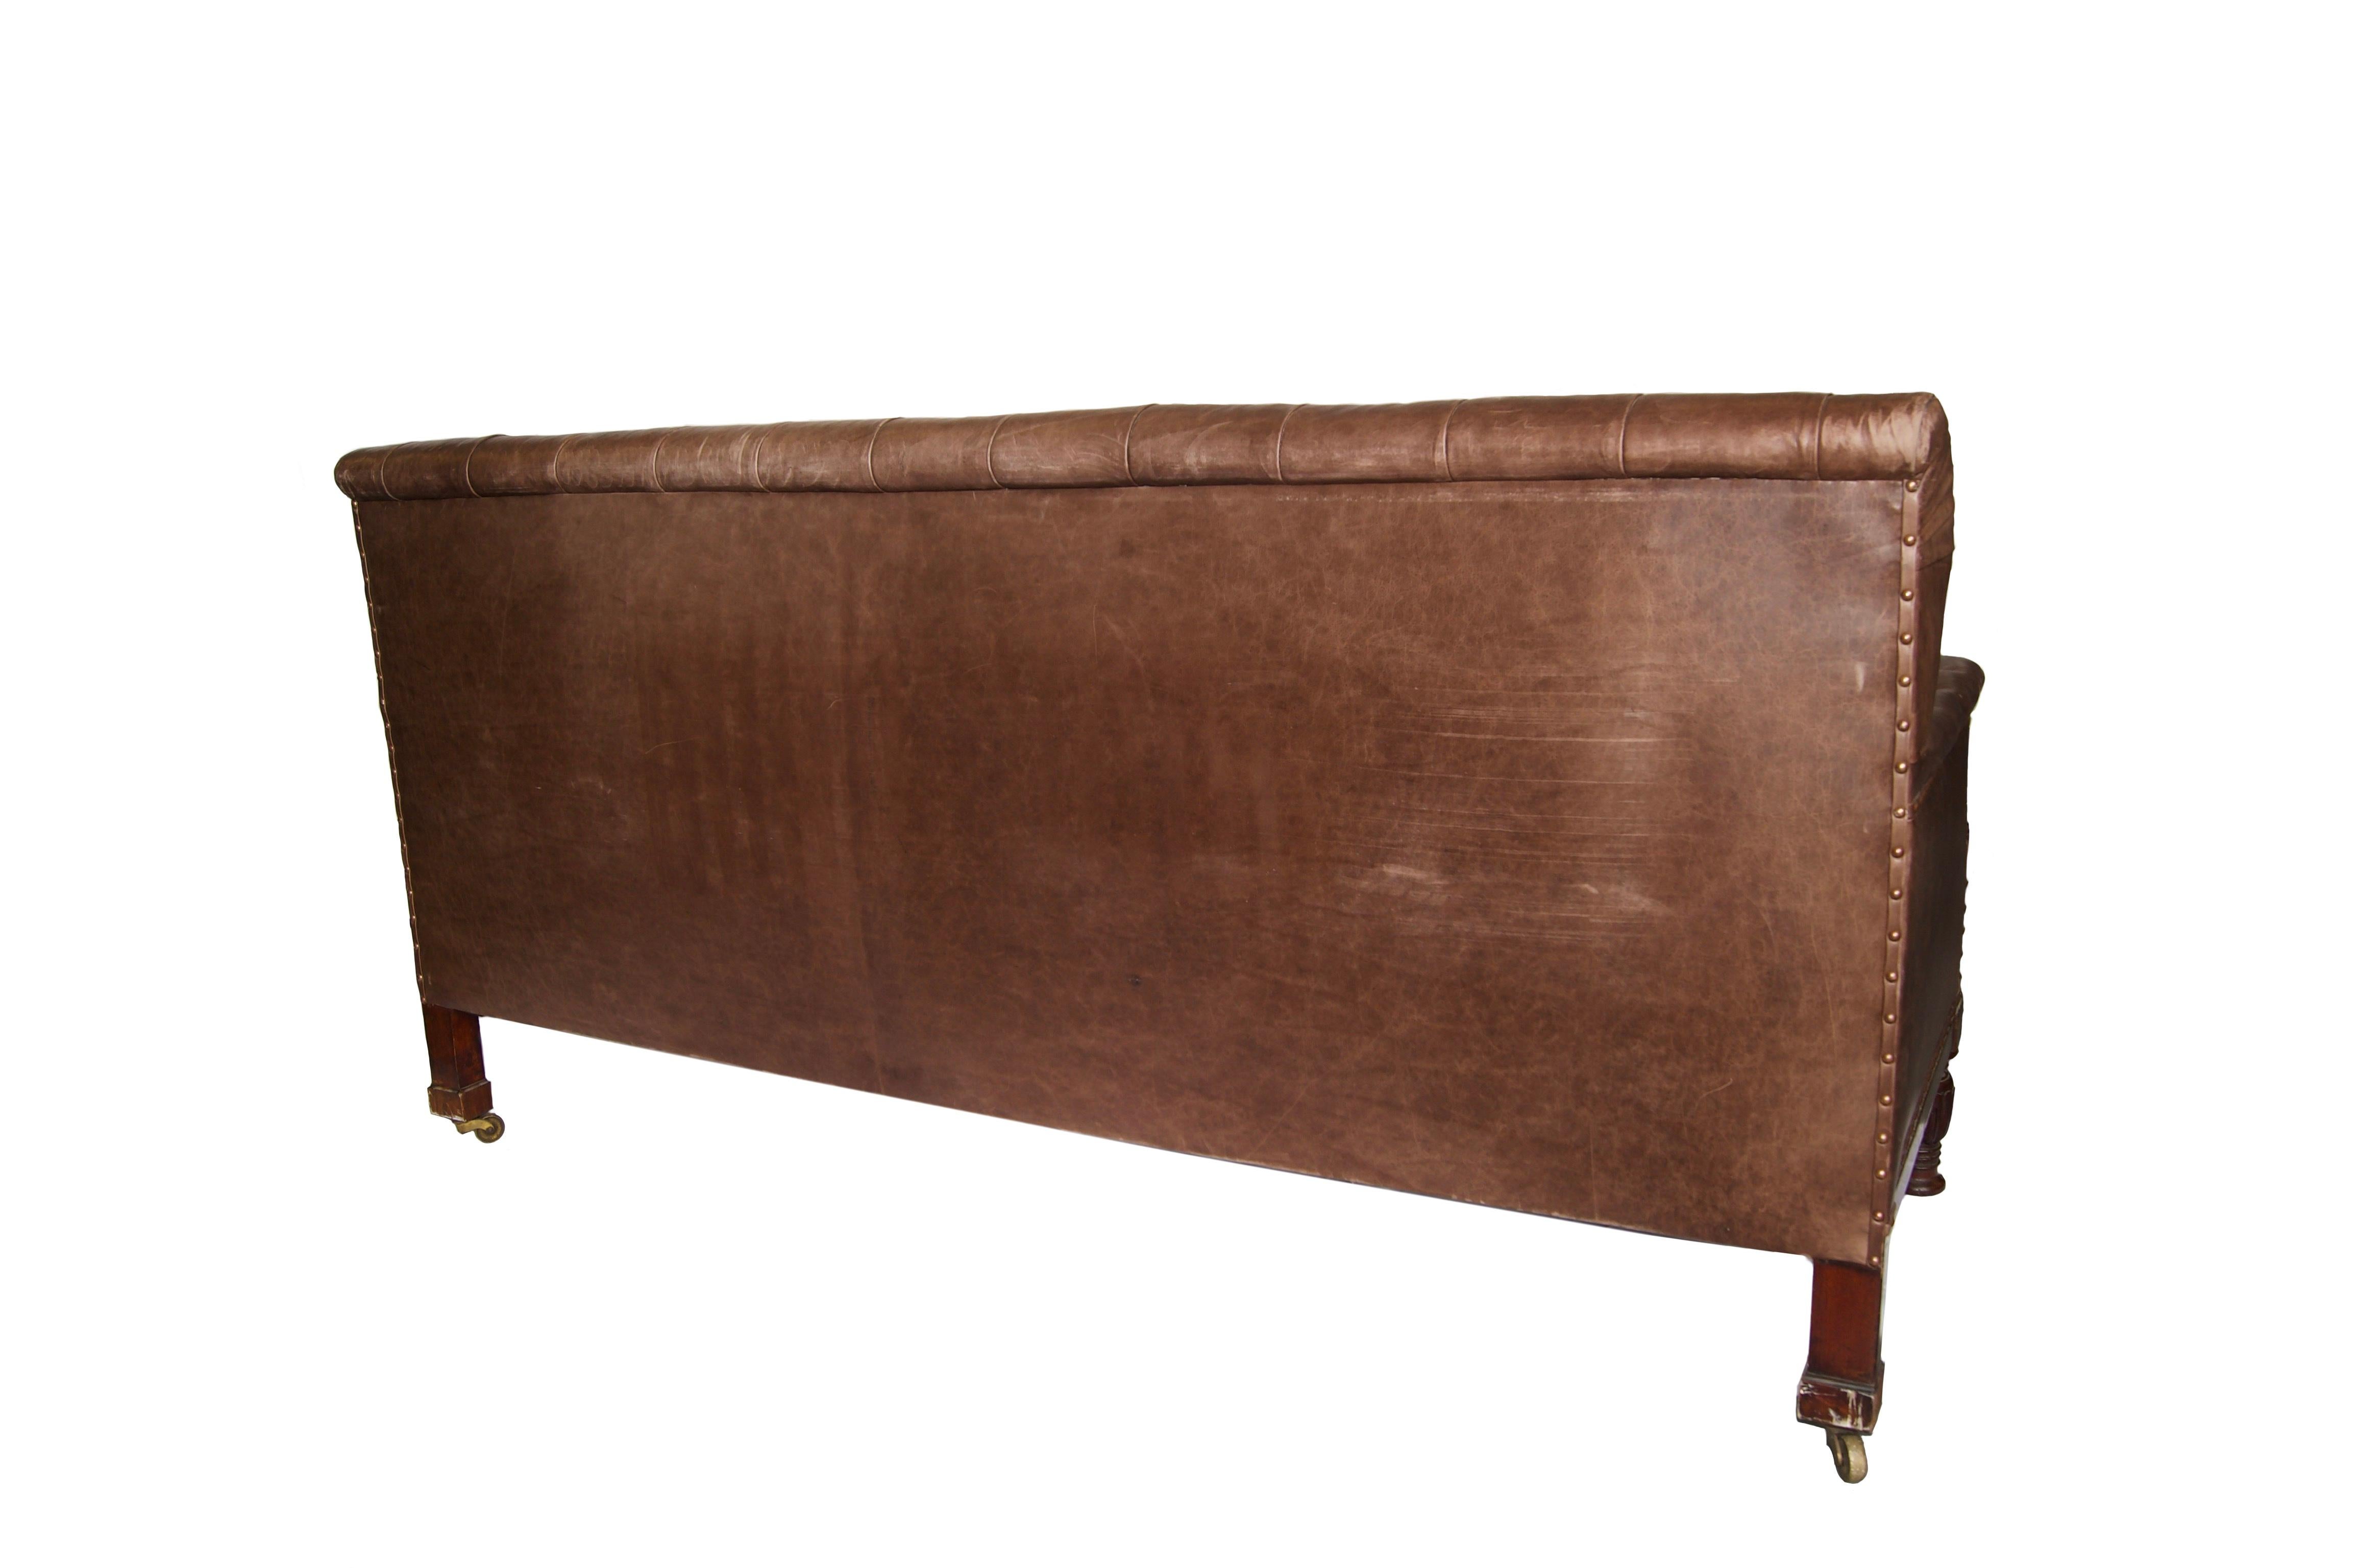 A George IV leather club sofa, early 19th century with straight back and arms, turned wood legs, upholstered in dark brown leather, button and stud detail.